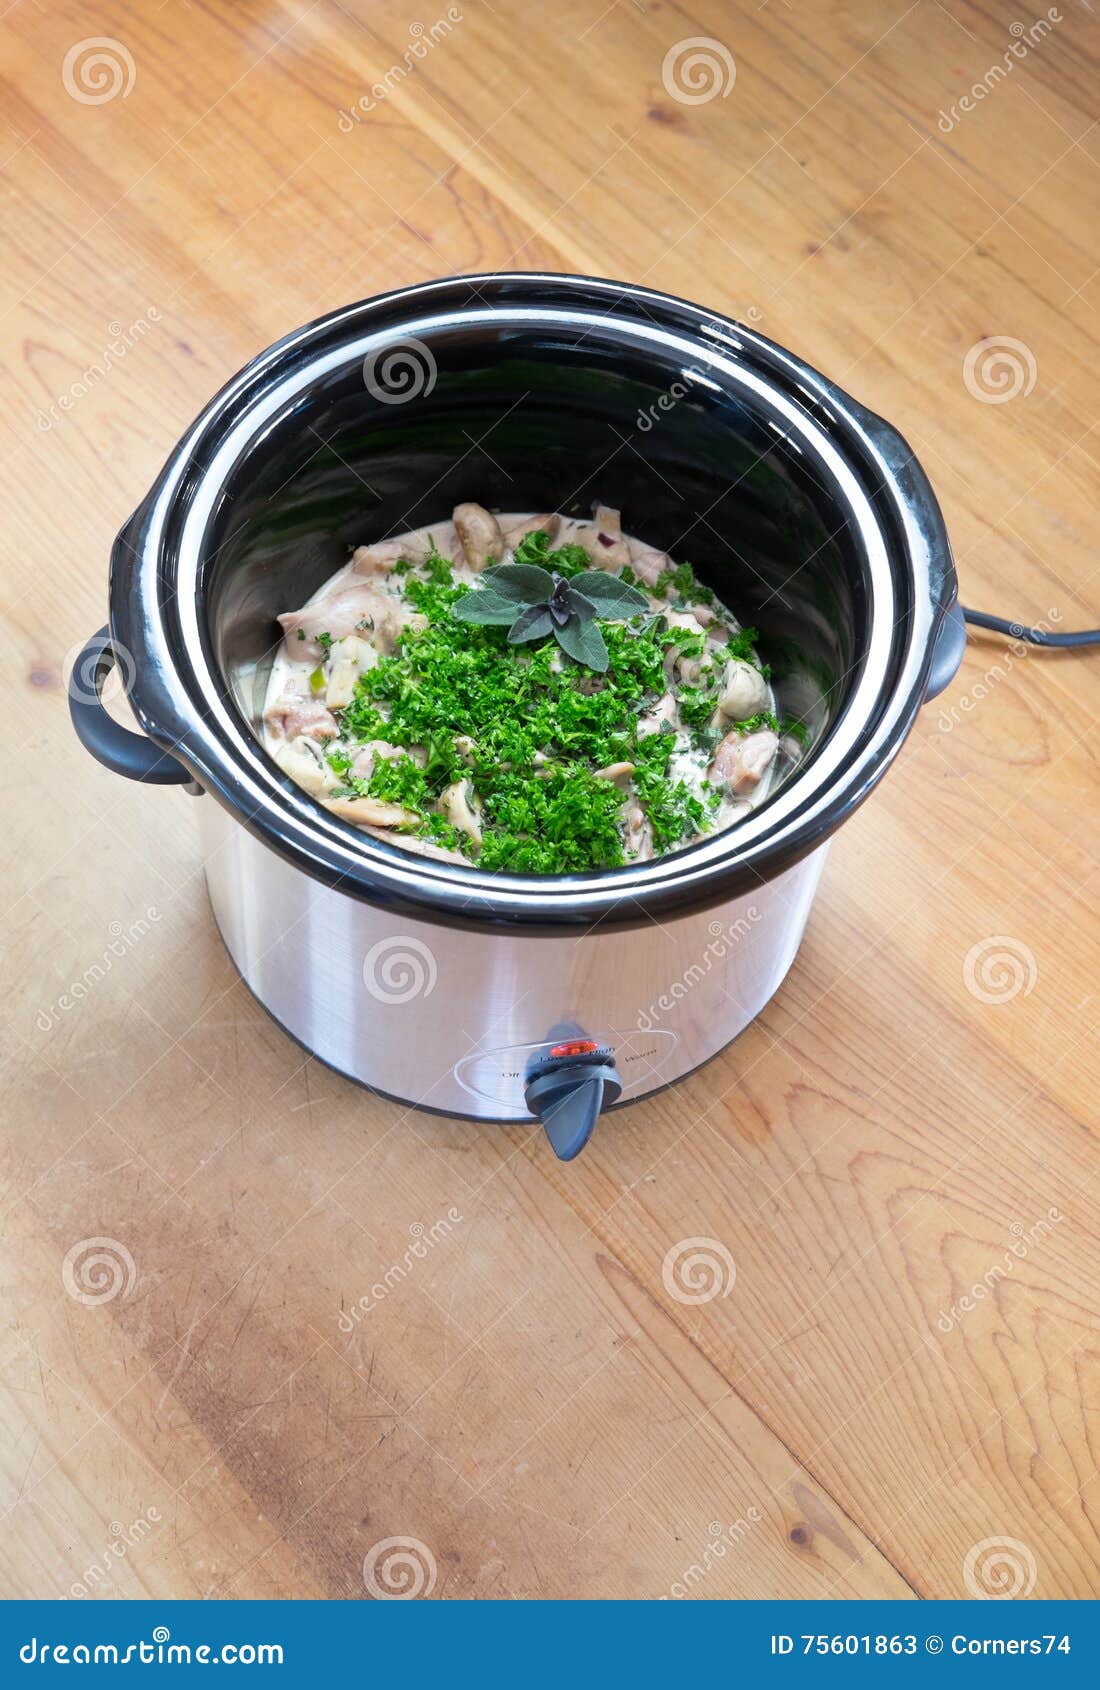 crockpot slow cooker meal with chicken and fresh herbs